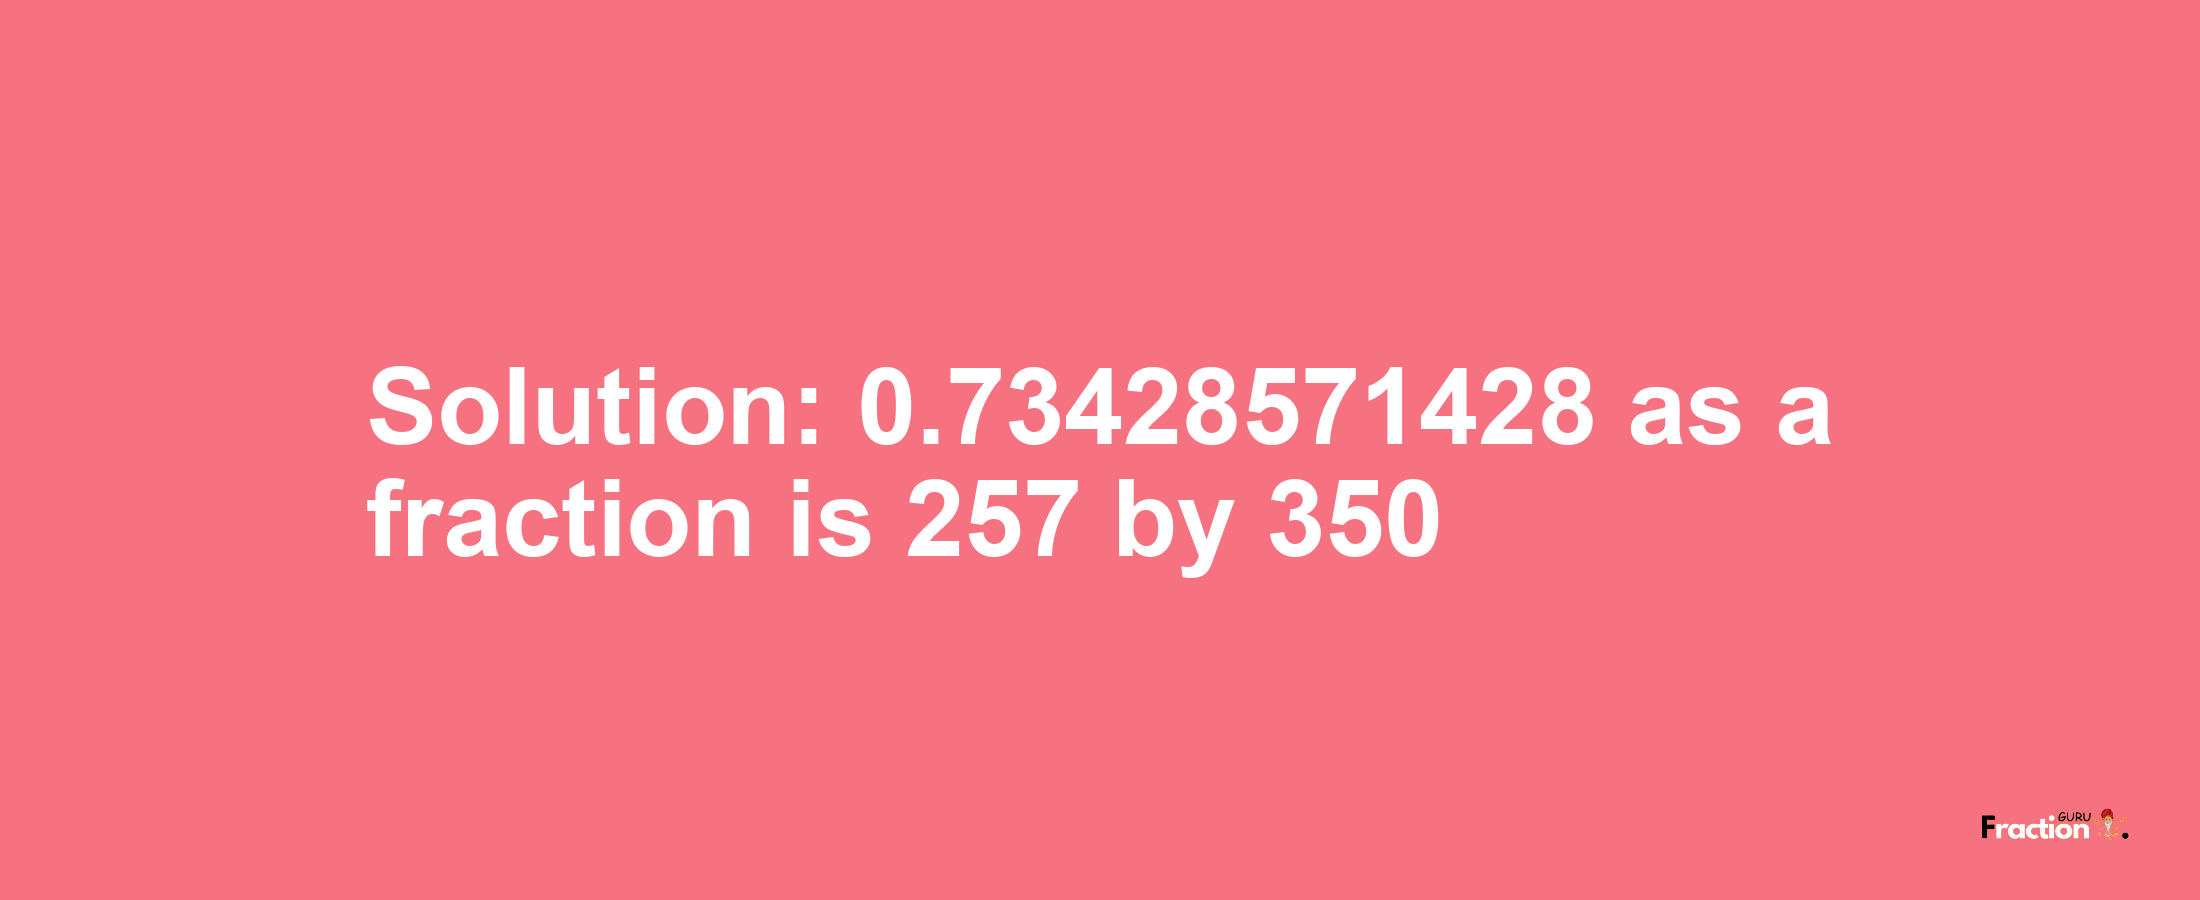 Solution:0.73428571428 as a fraction is 257/350